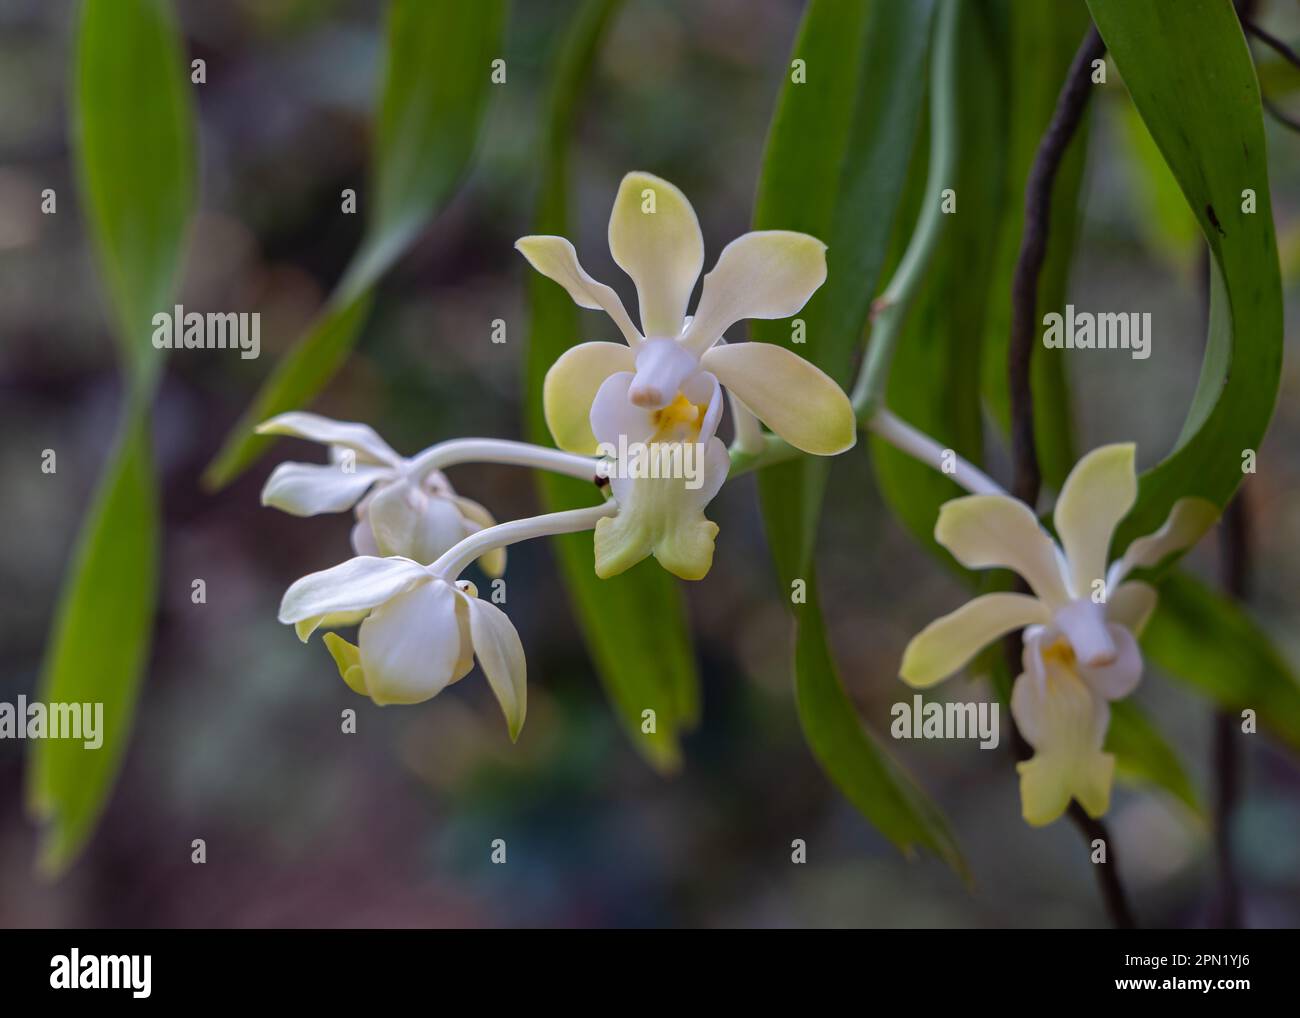 Closeup view of delicate yellow and white vanda denisoniana epiphytic orchid species flowers blooming outdoors on natural background Stock Photo